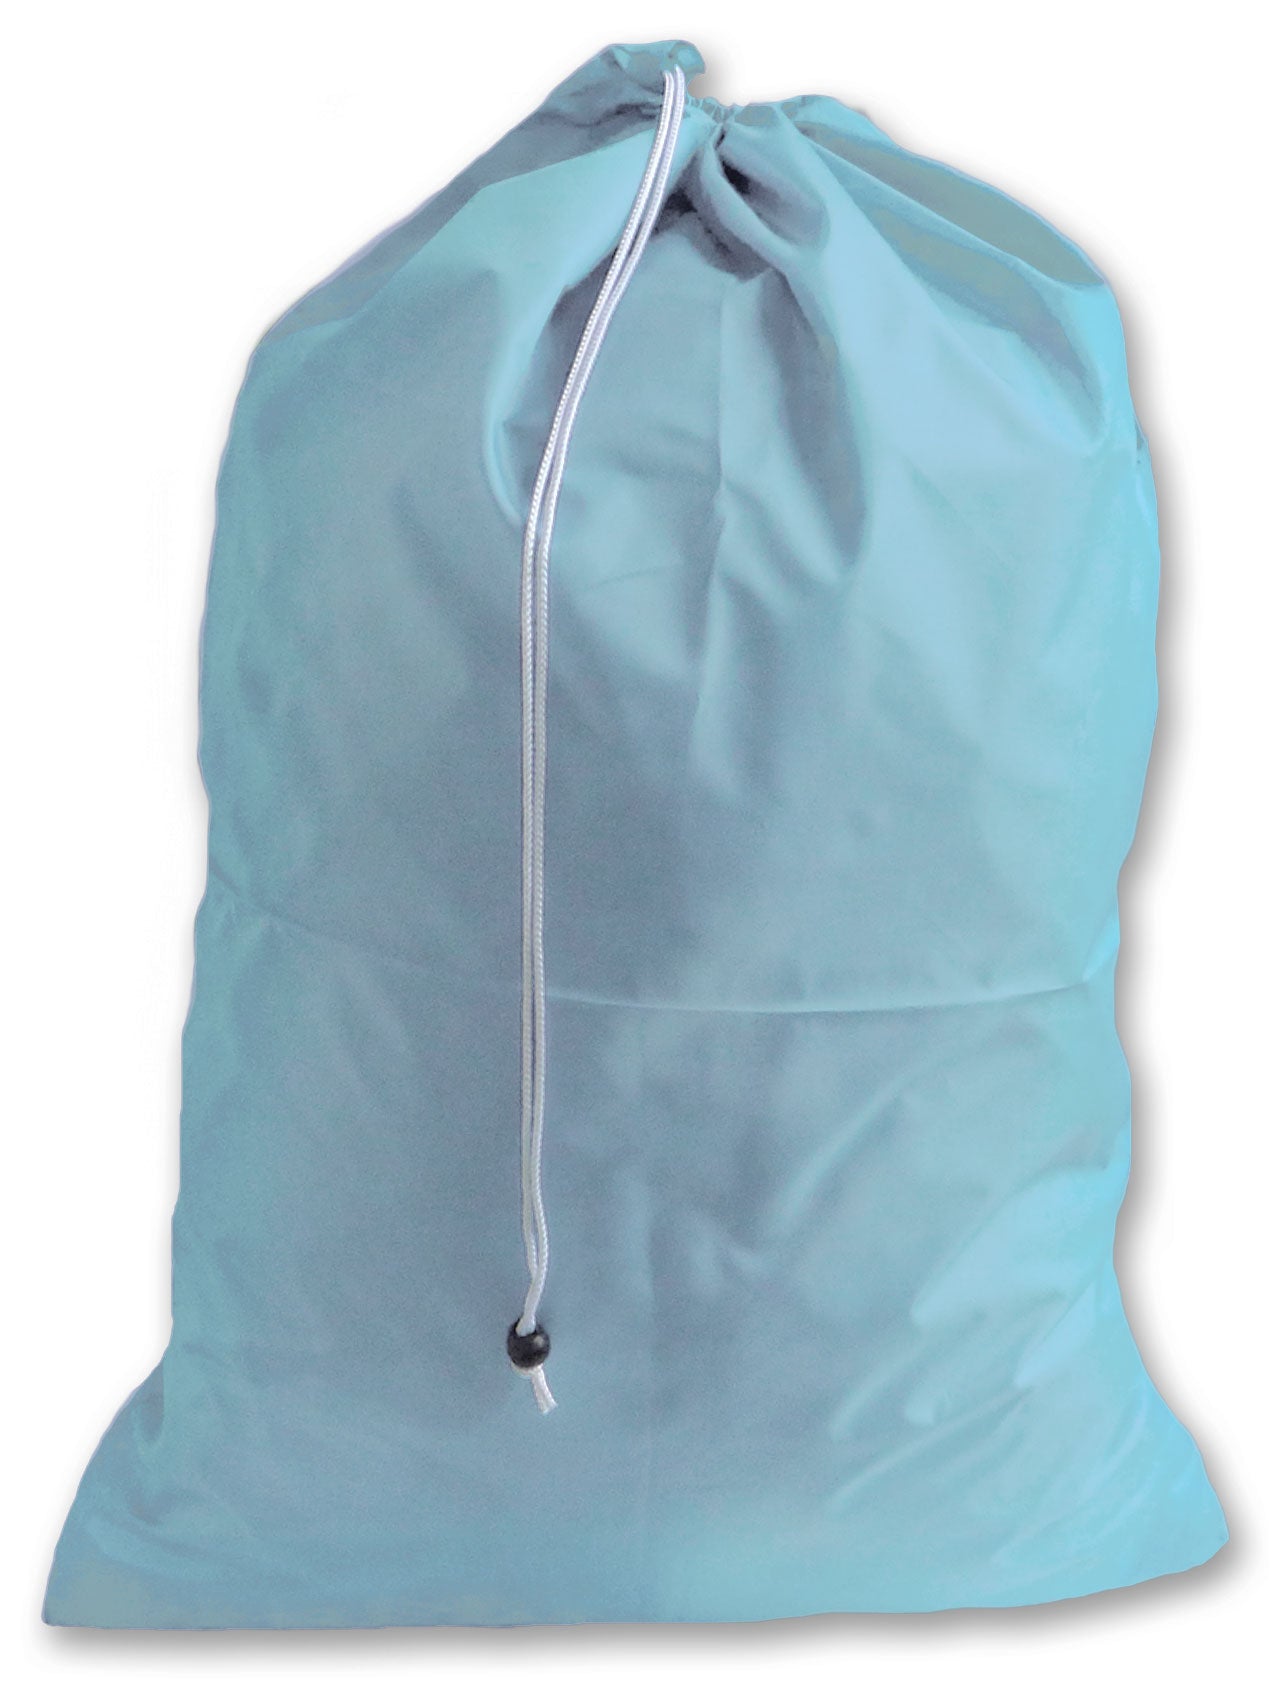 Laundry Bag with Drawstring and Locking Closure, Color: Lime Green Fluorescent, Small Size: 22x28